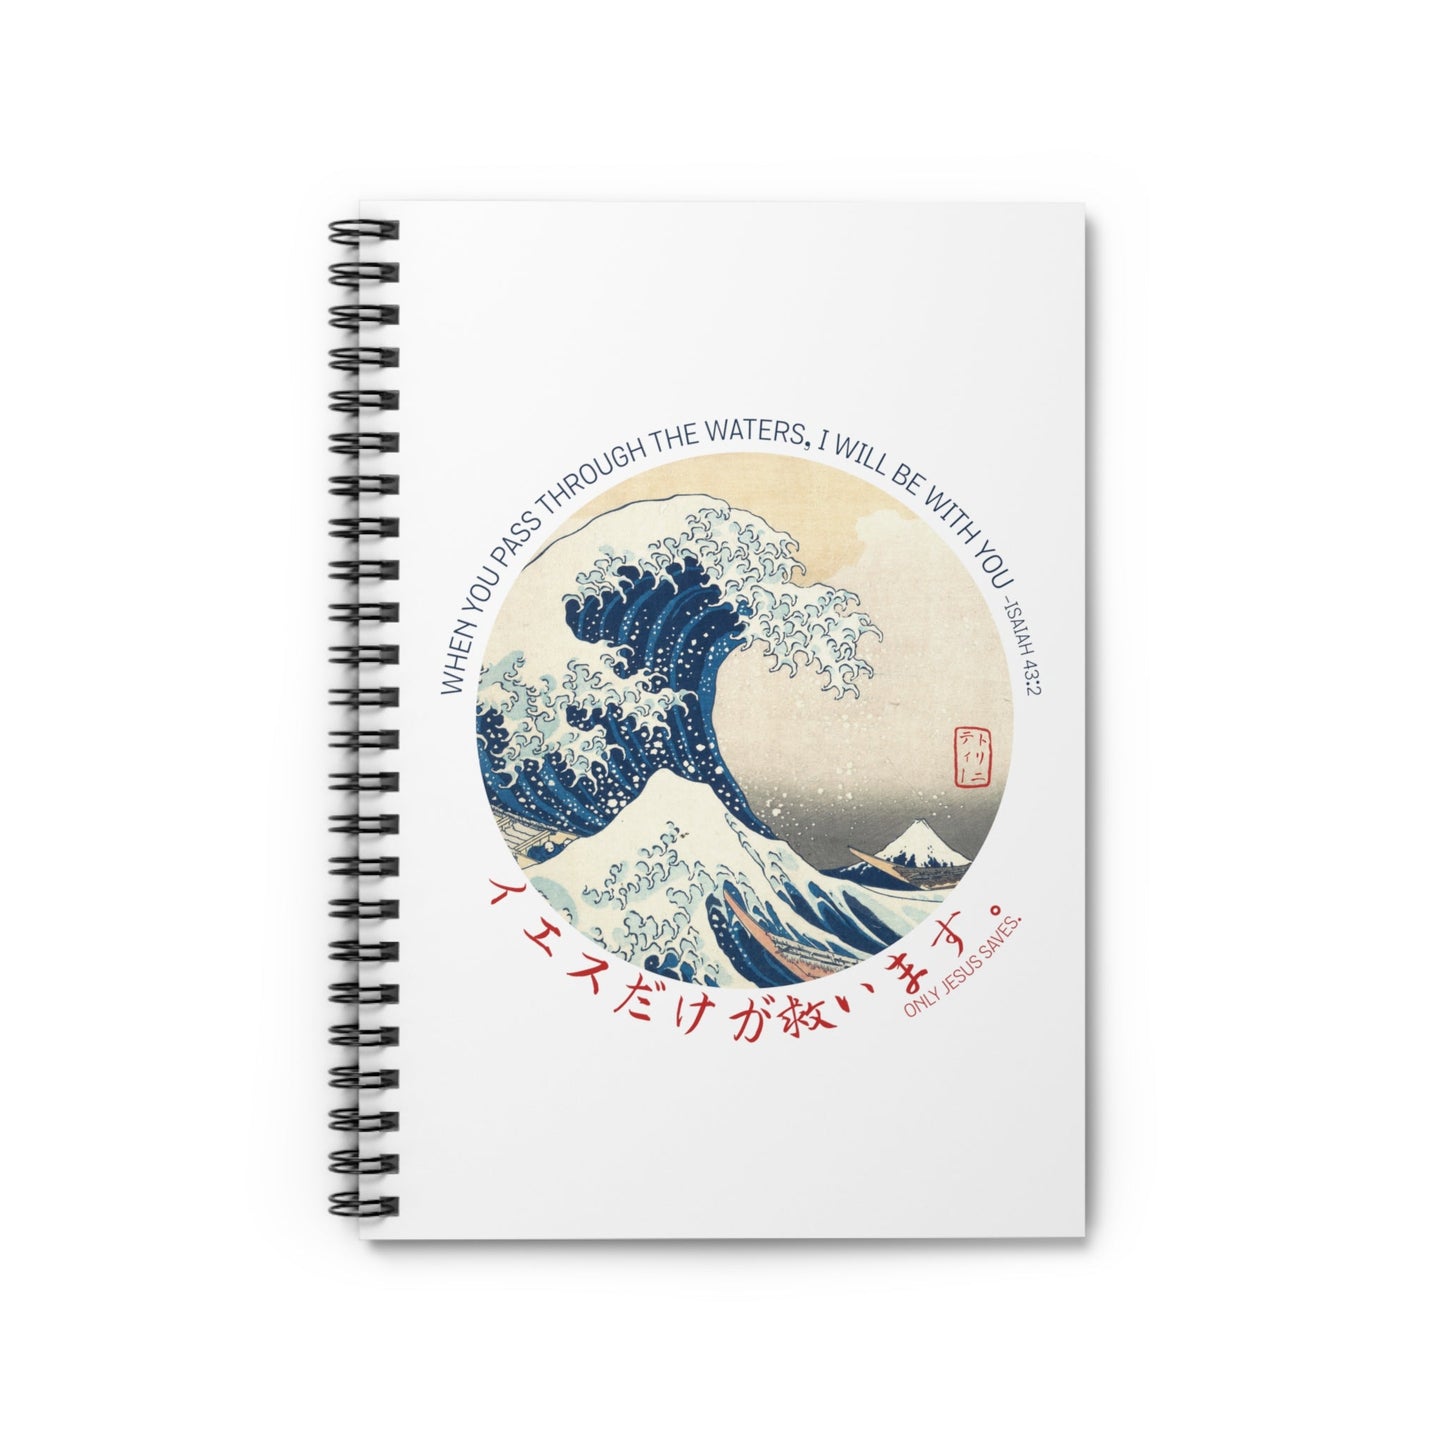 The Great Wave - Notebook - Trini-T Ministries